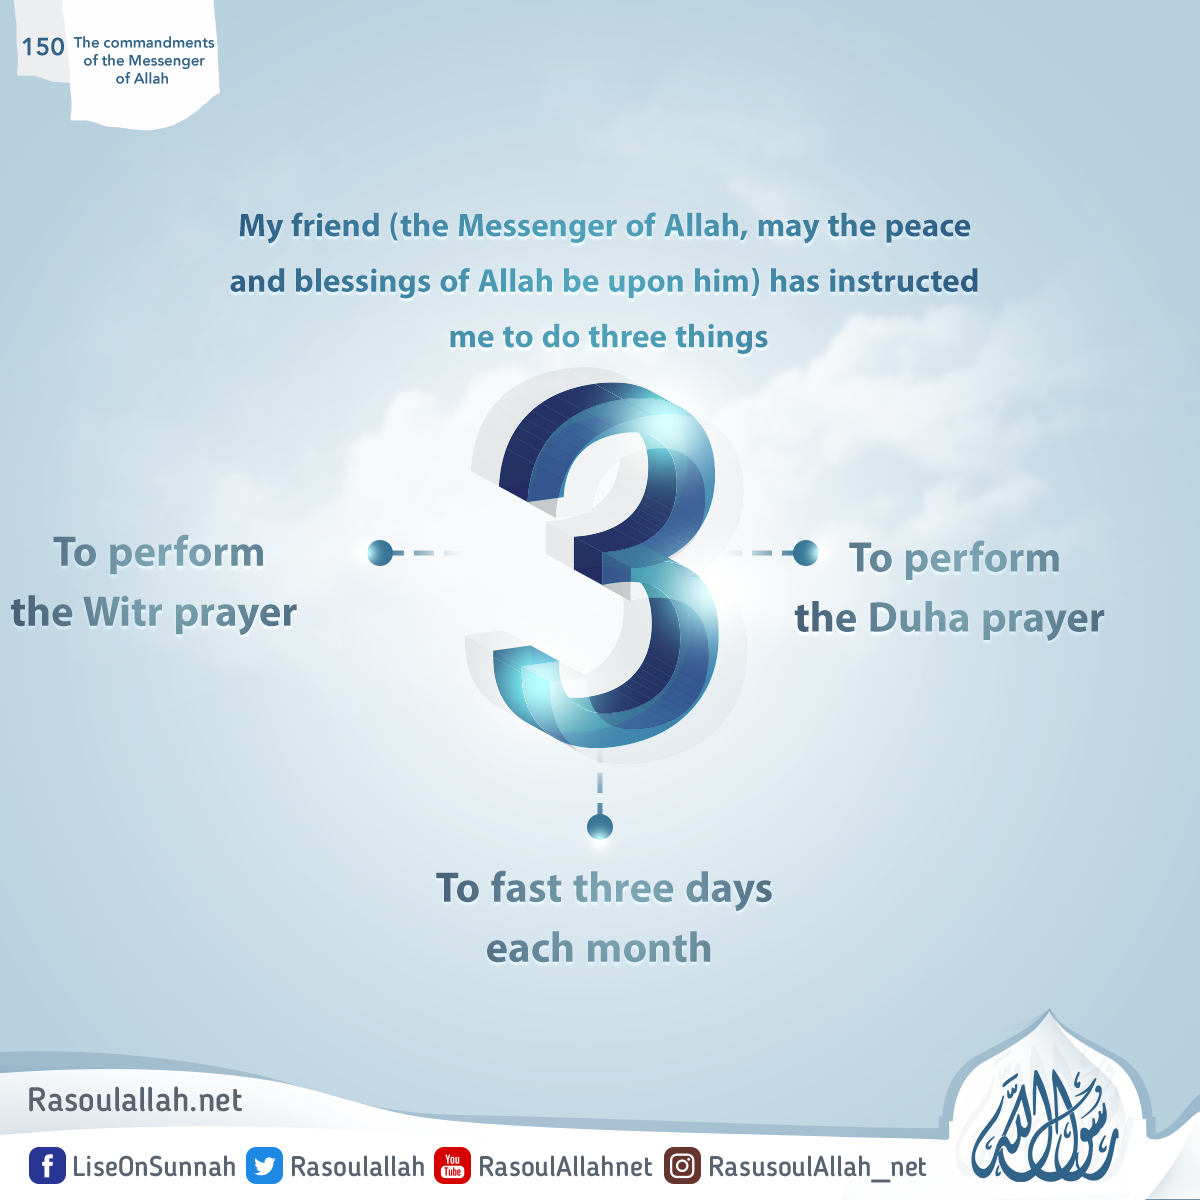 photo_My friend (the Messenger of Allah, may the peace and blessings of Allah be upon him) has instructed me to do three things